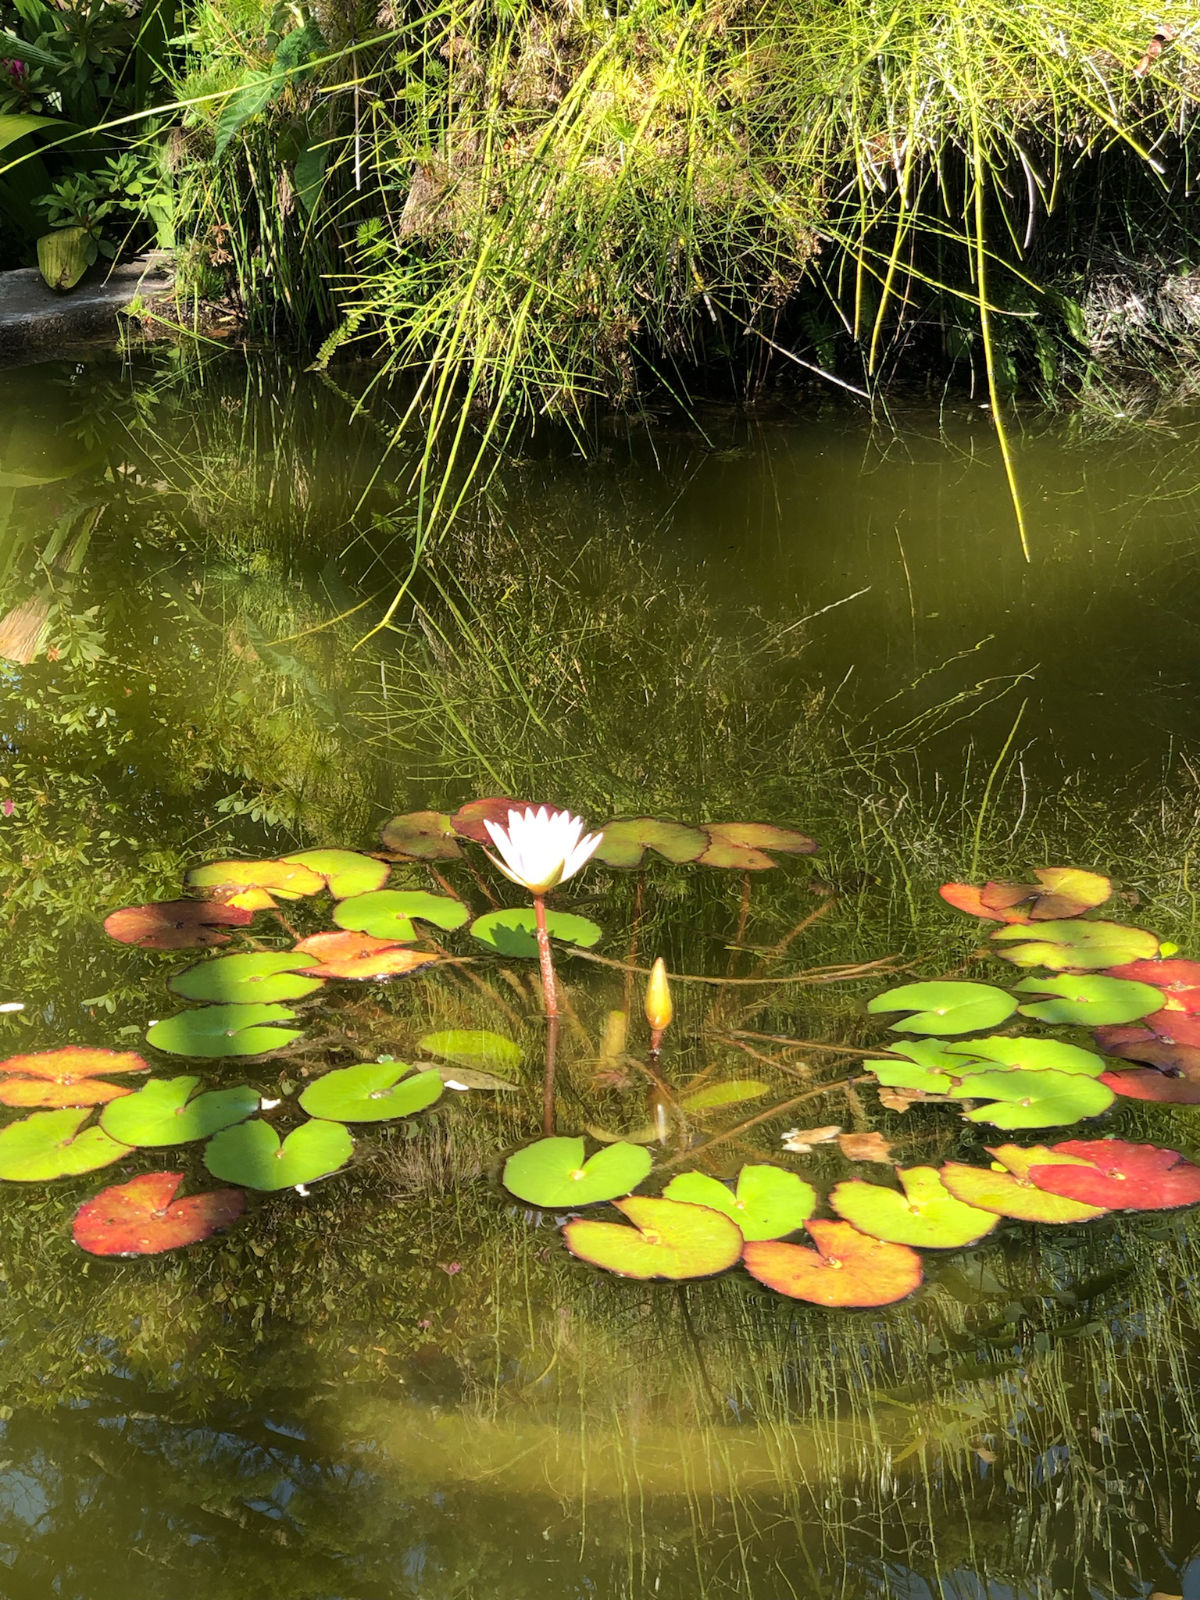 A single lotus blooming in a pond